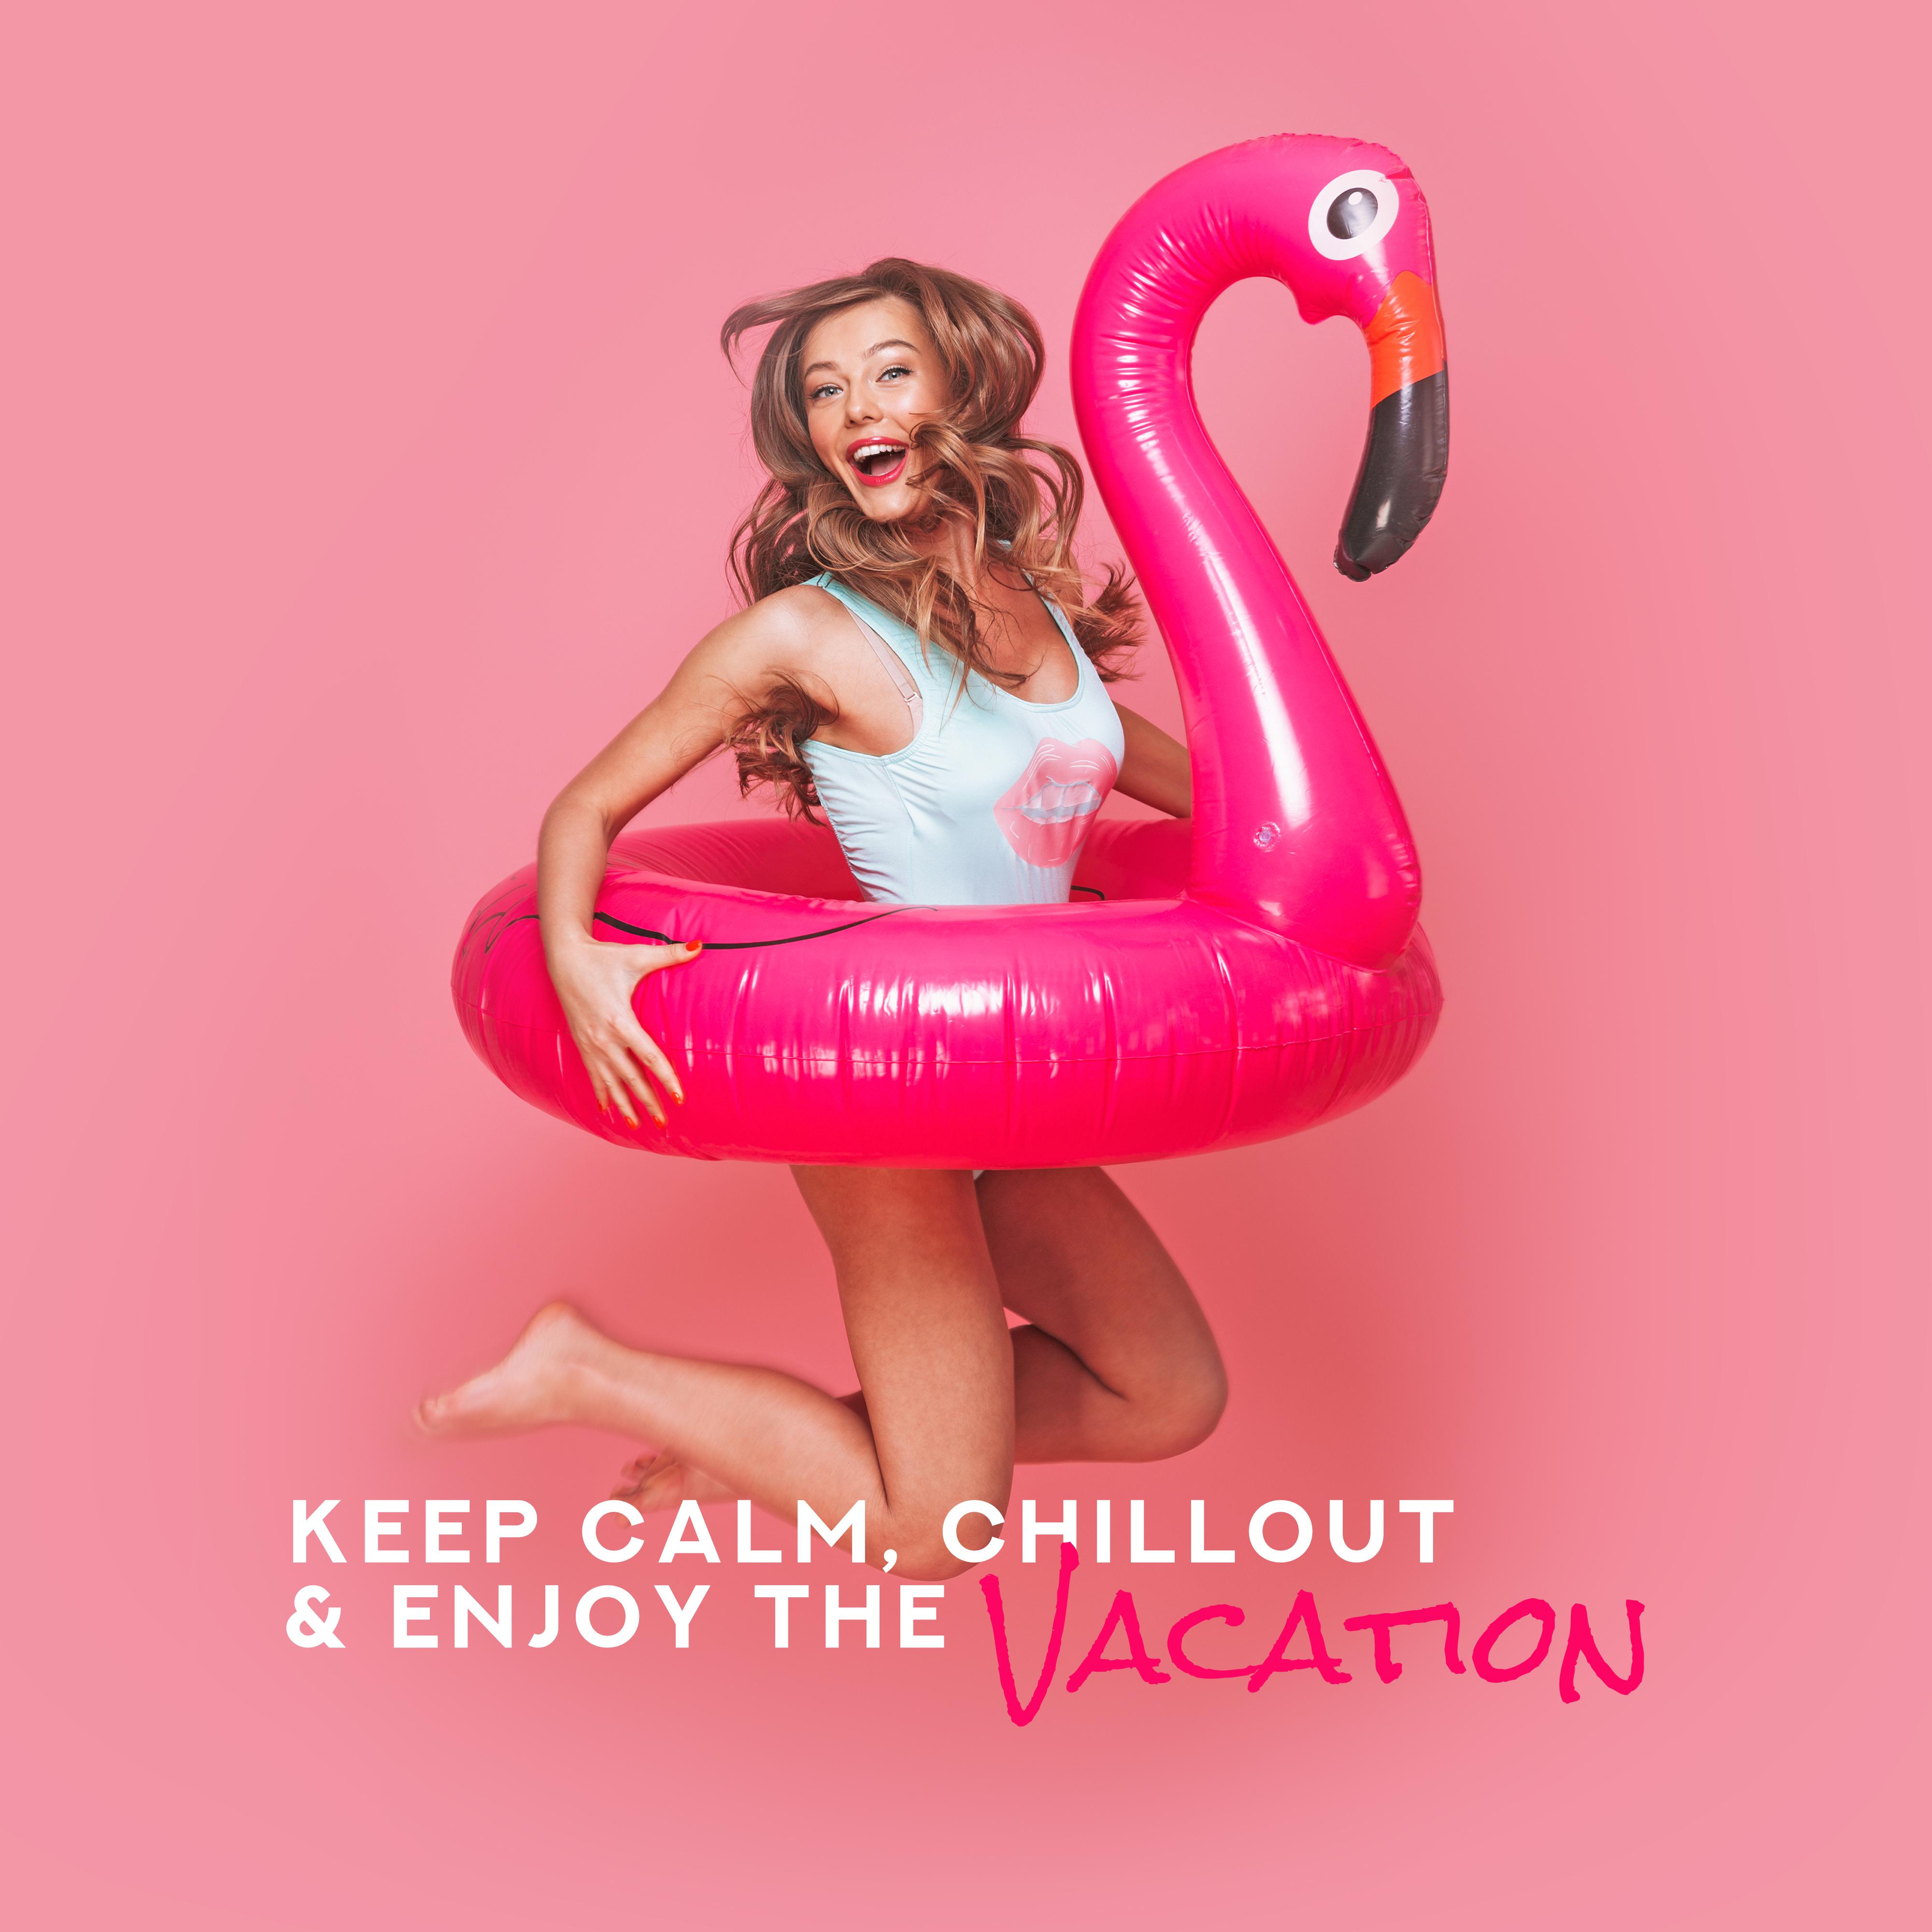 Keep Calm, Chillout & Enjoy the Vacation: Selection of Best 2019 Holiday Chill Out Anthems, Music for Sun Salutation, Relaxing Under the Palms & Drink Tropical Cocktails